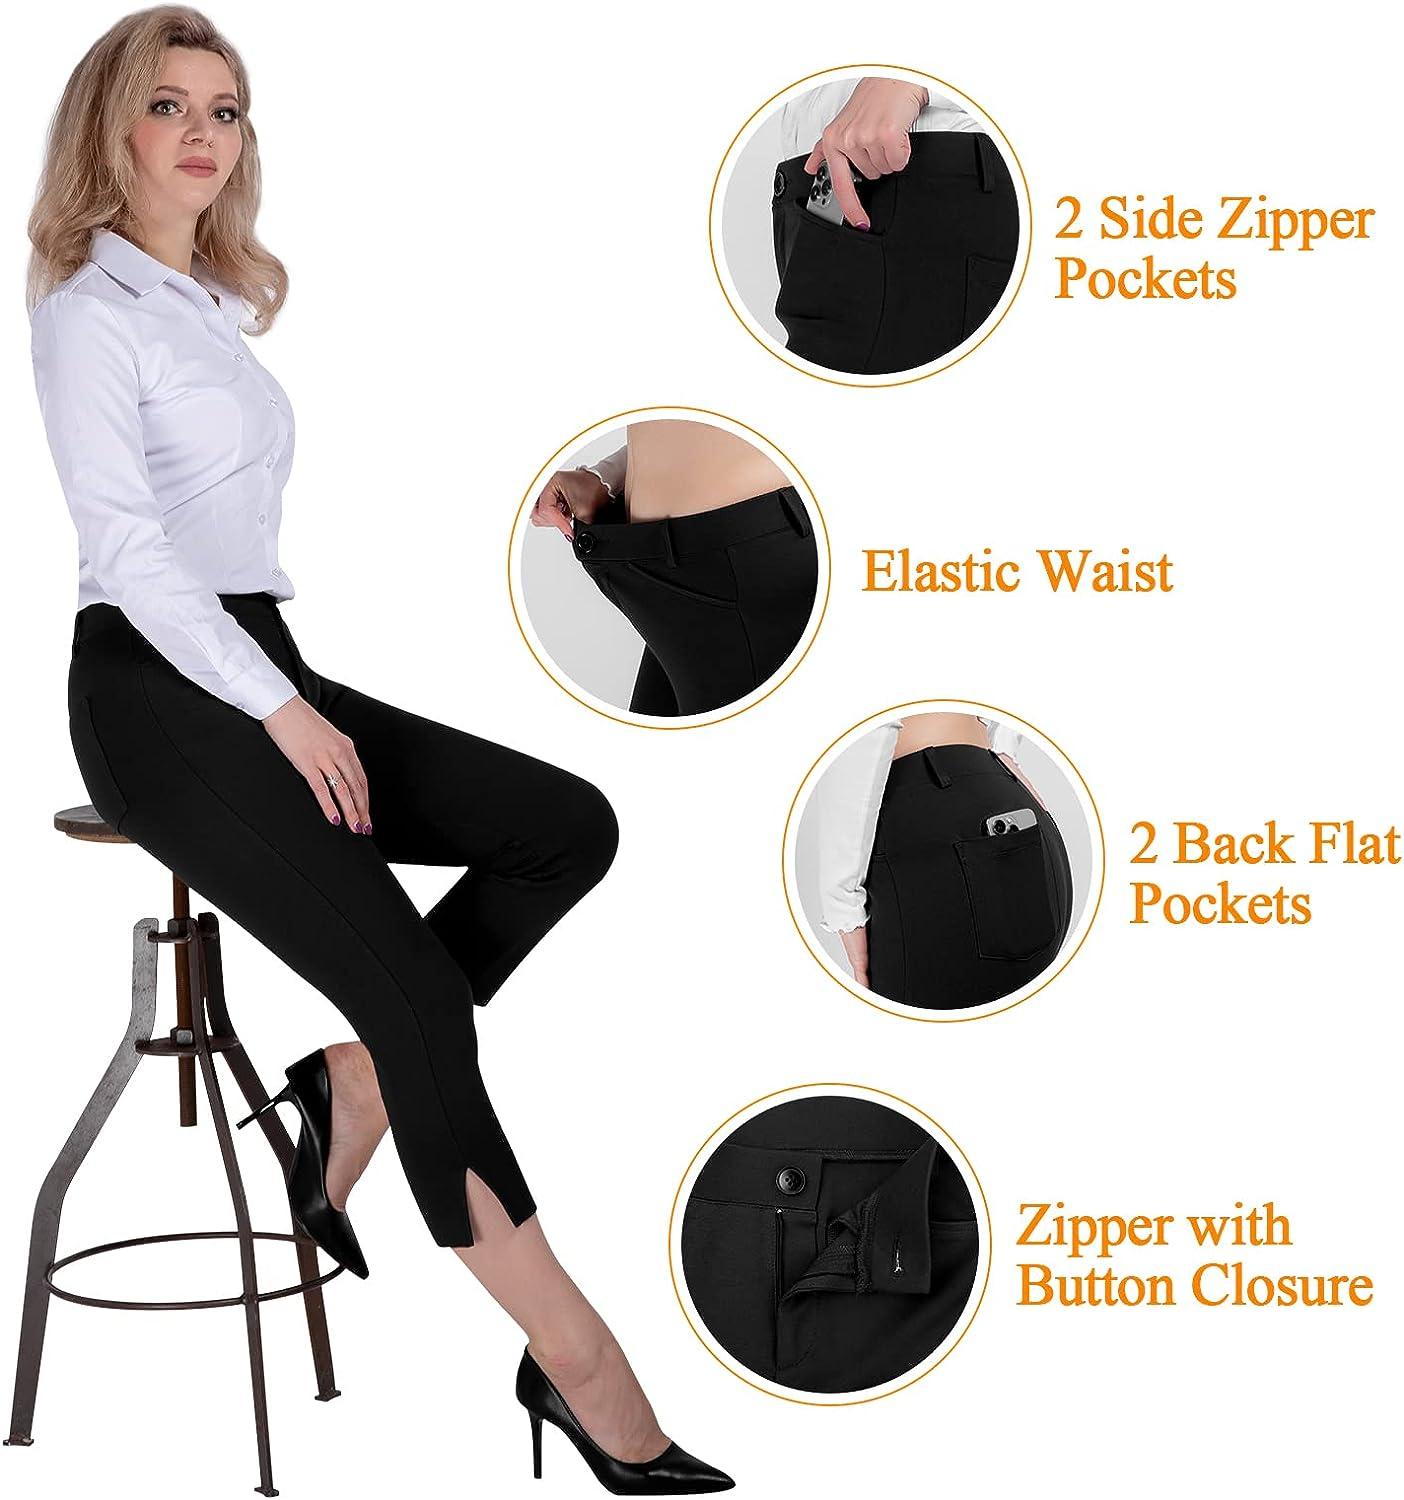  PUWEER Work Pants For Women, Stretch Dress Pants